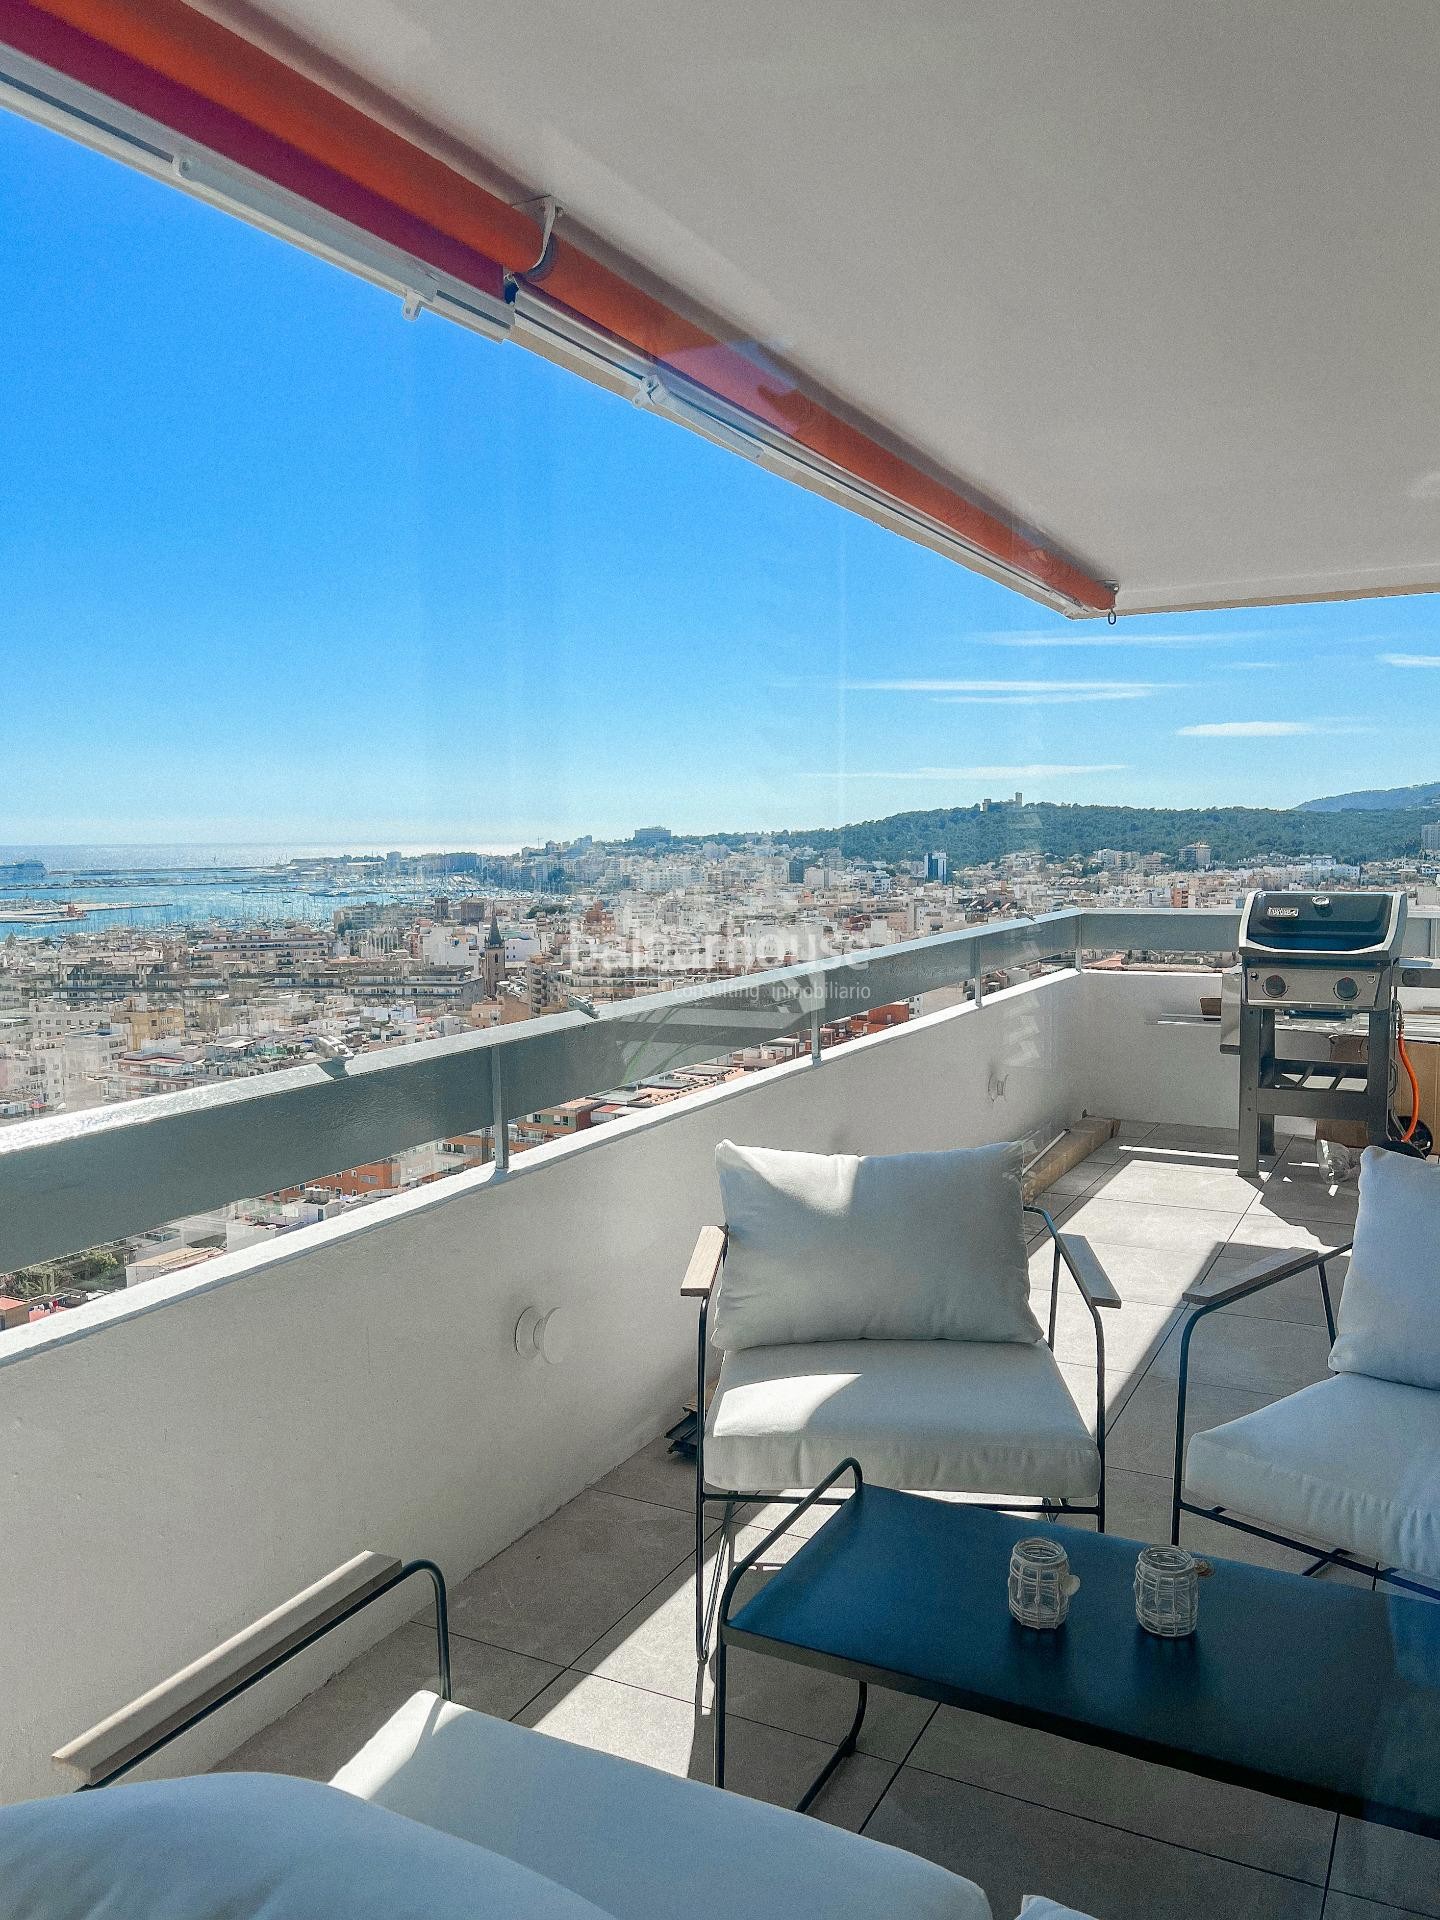 Stunning refurbished apartment spectacular views of the city and the sea.